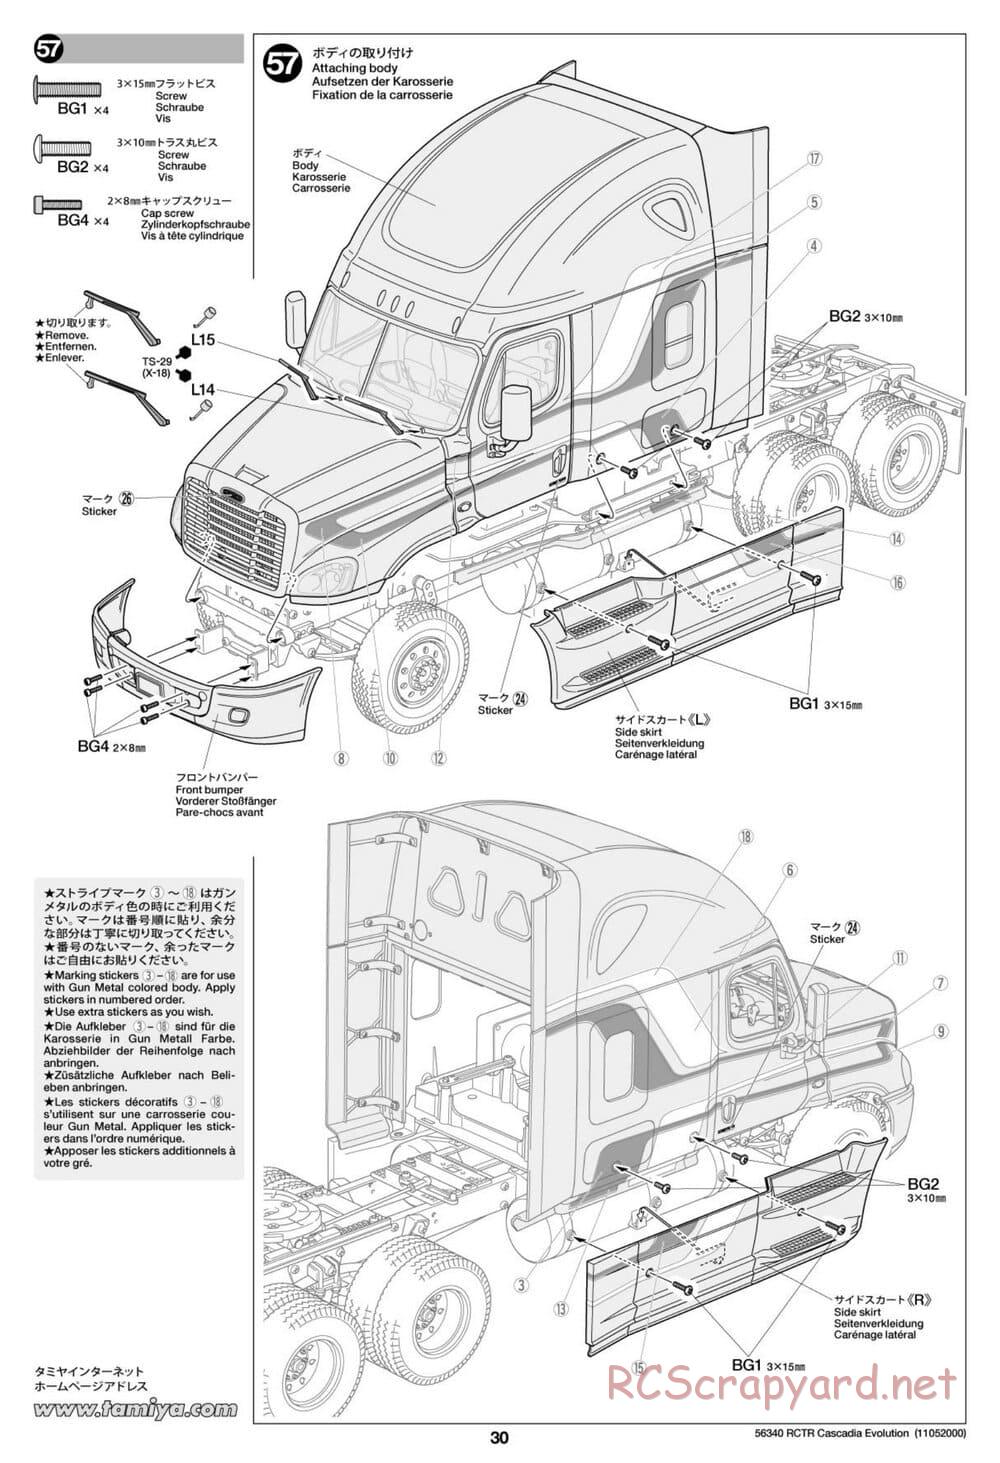 Tamiya - Freightliner Cascadia Evolution Tractor Truck Chassis - Manual - Page 30